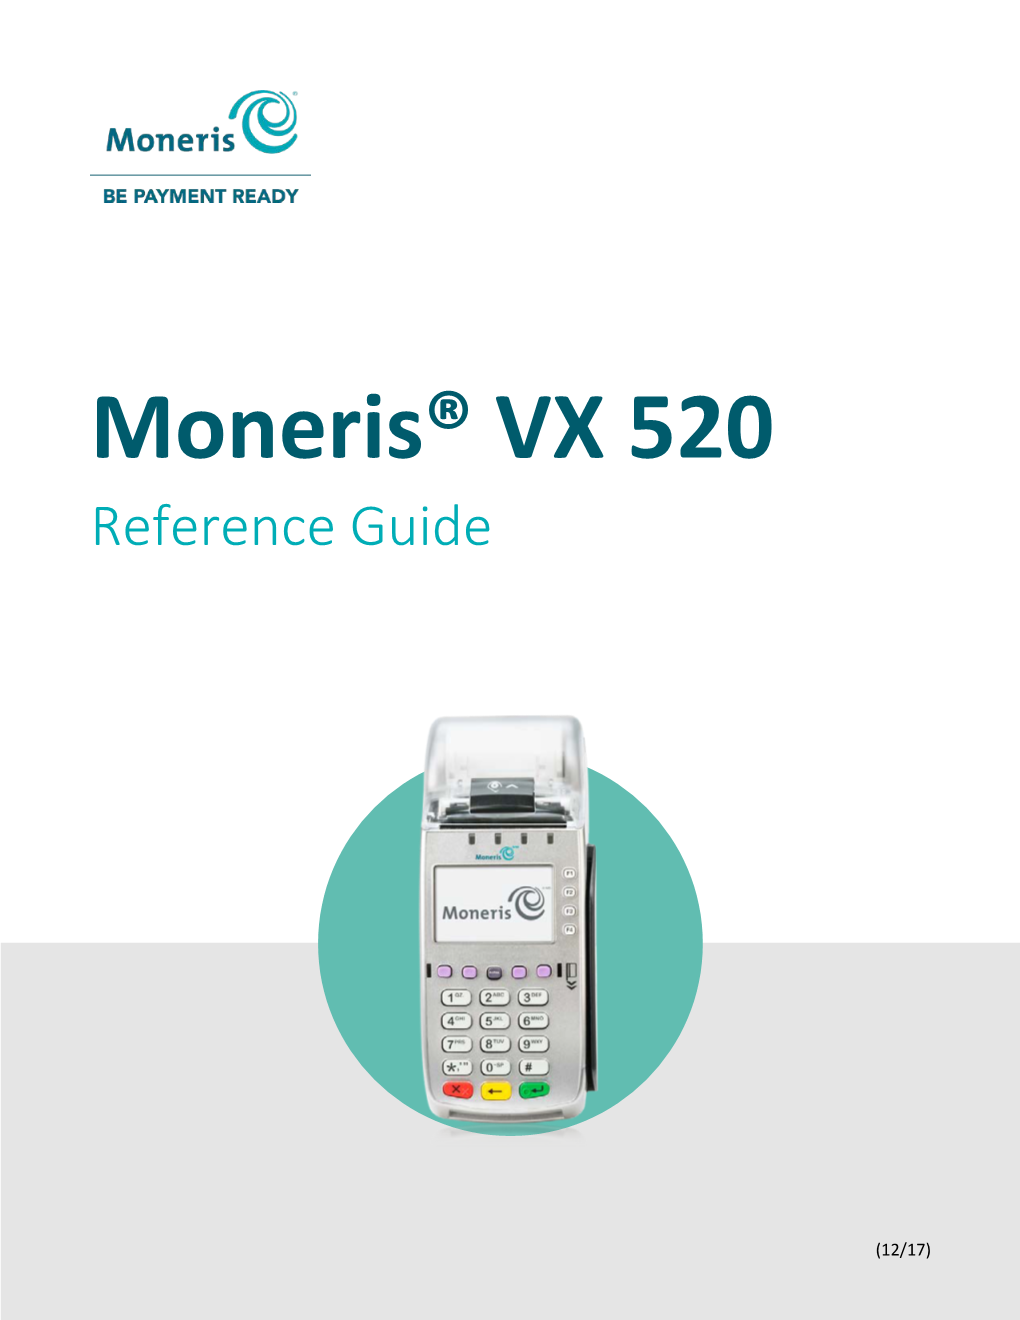 Moneris VX 520 Reference Guide